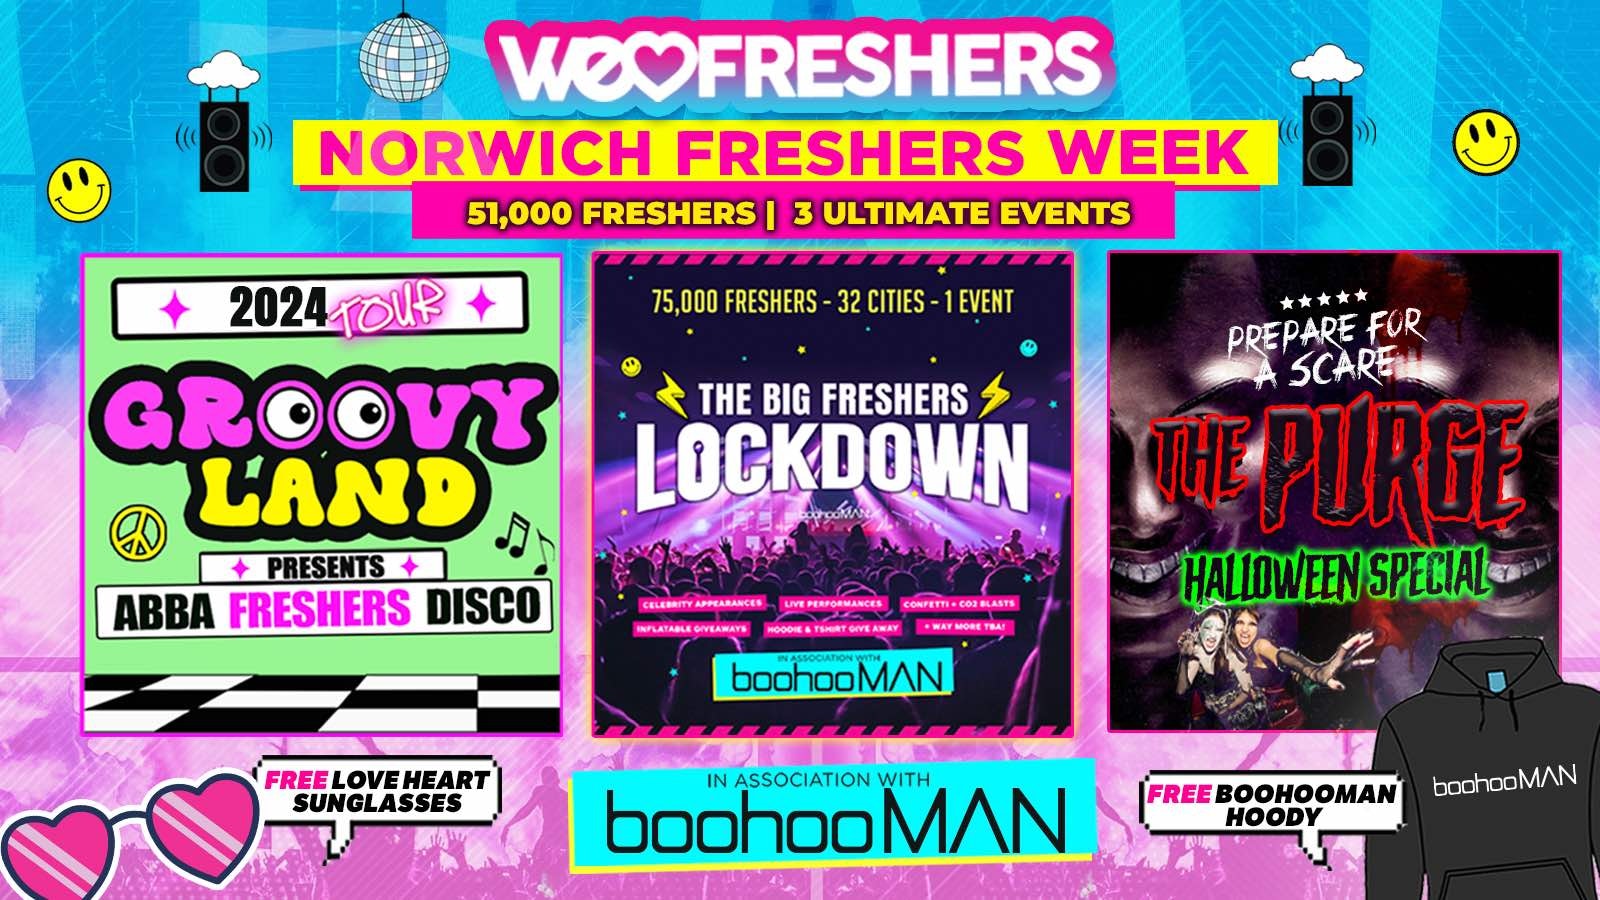 WE LOVE NORWICH FRESHERS 2024 in association with boohooMAN ❗FREE BOOHOOMAN HOODIE TODAY ONLY❗